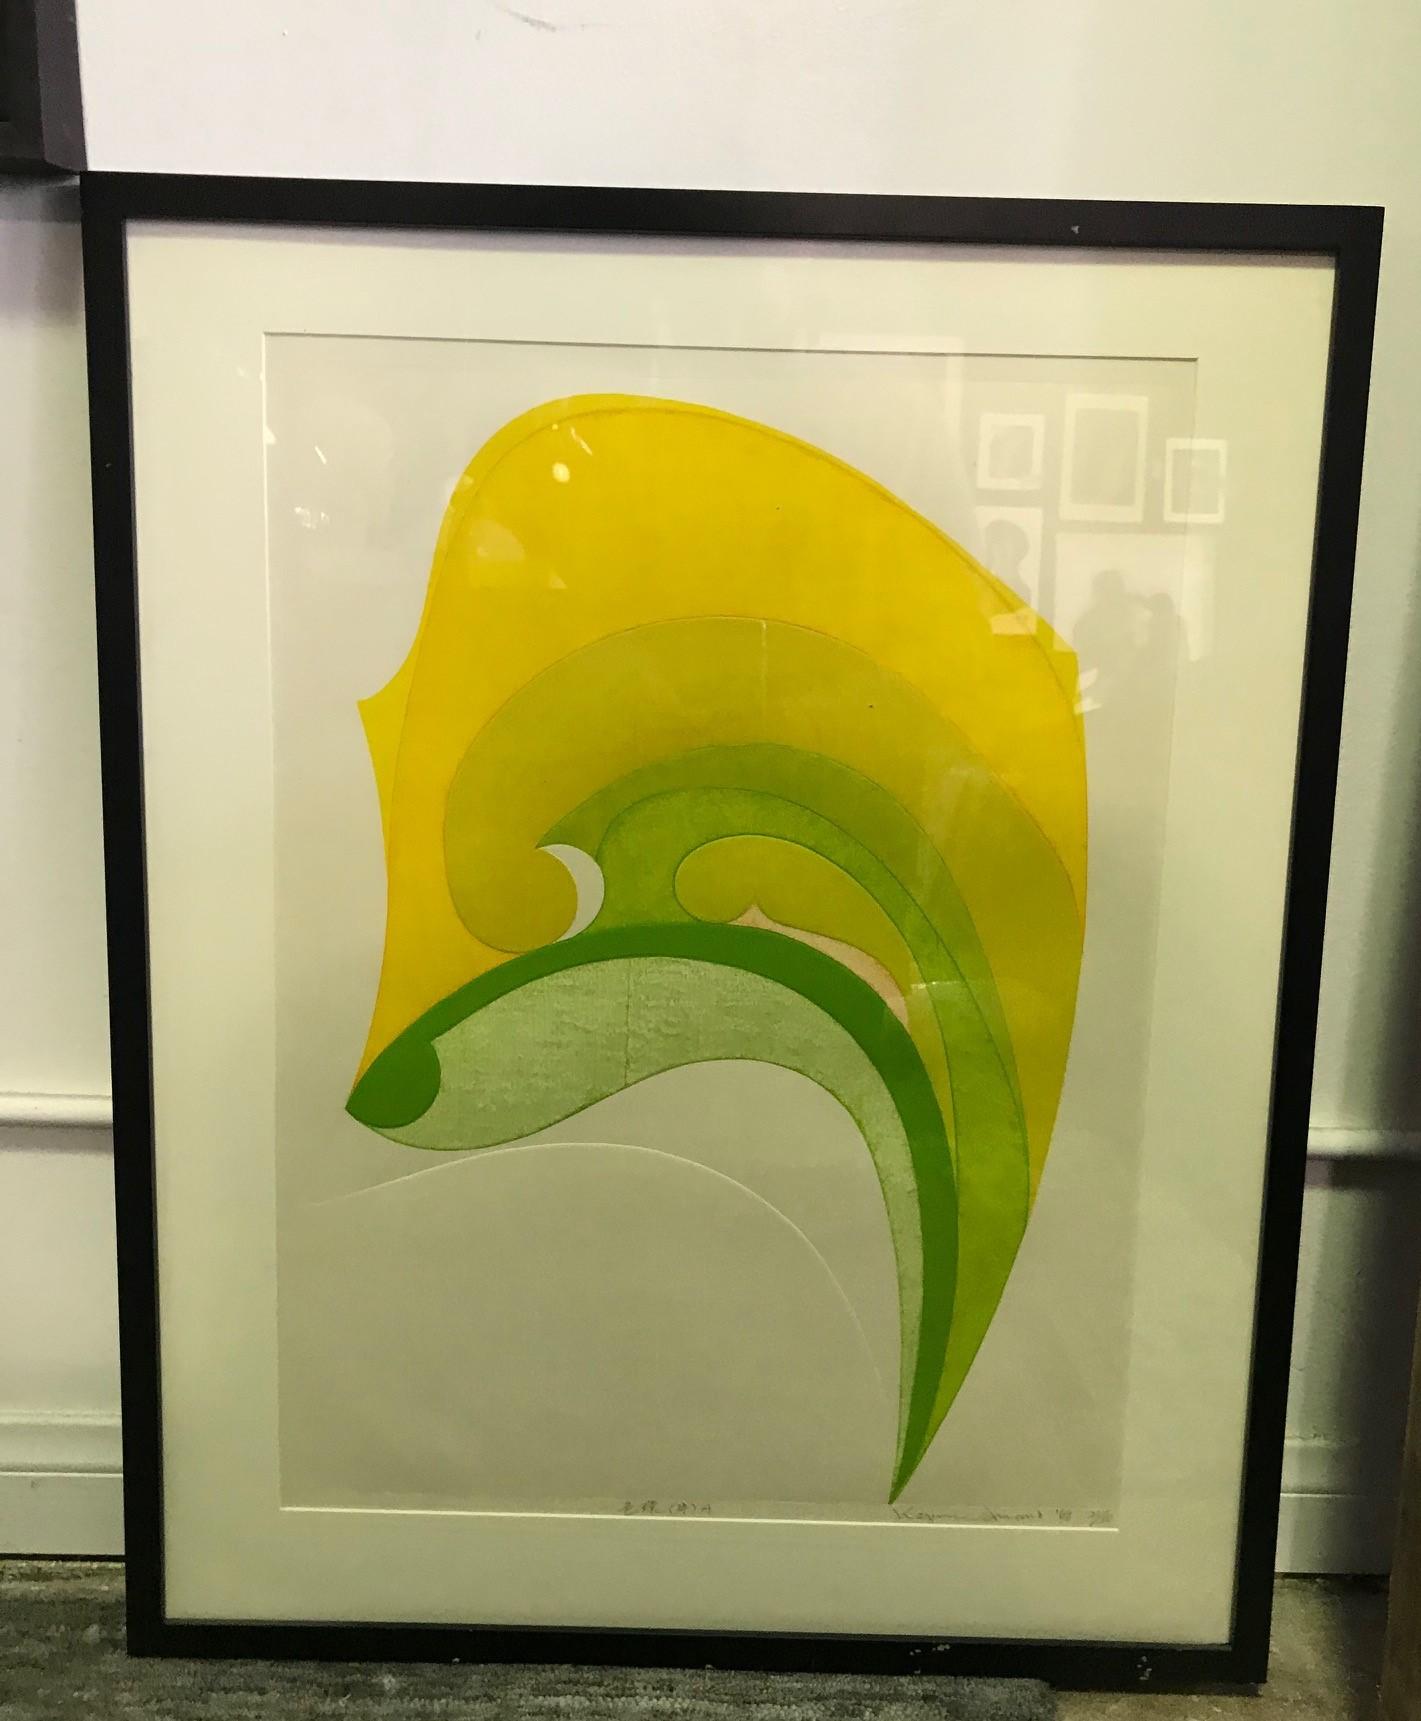 A bold design and wonderfully colored work by Japanese artist Kazumi Amano who was renowned for working with organic shapes and different textures. 

This print is pencil signed, titled in Japanese, dated (1968) and numbered (21/30) by the